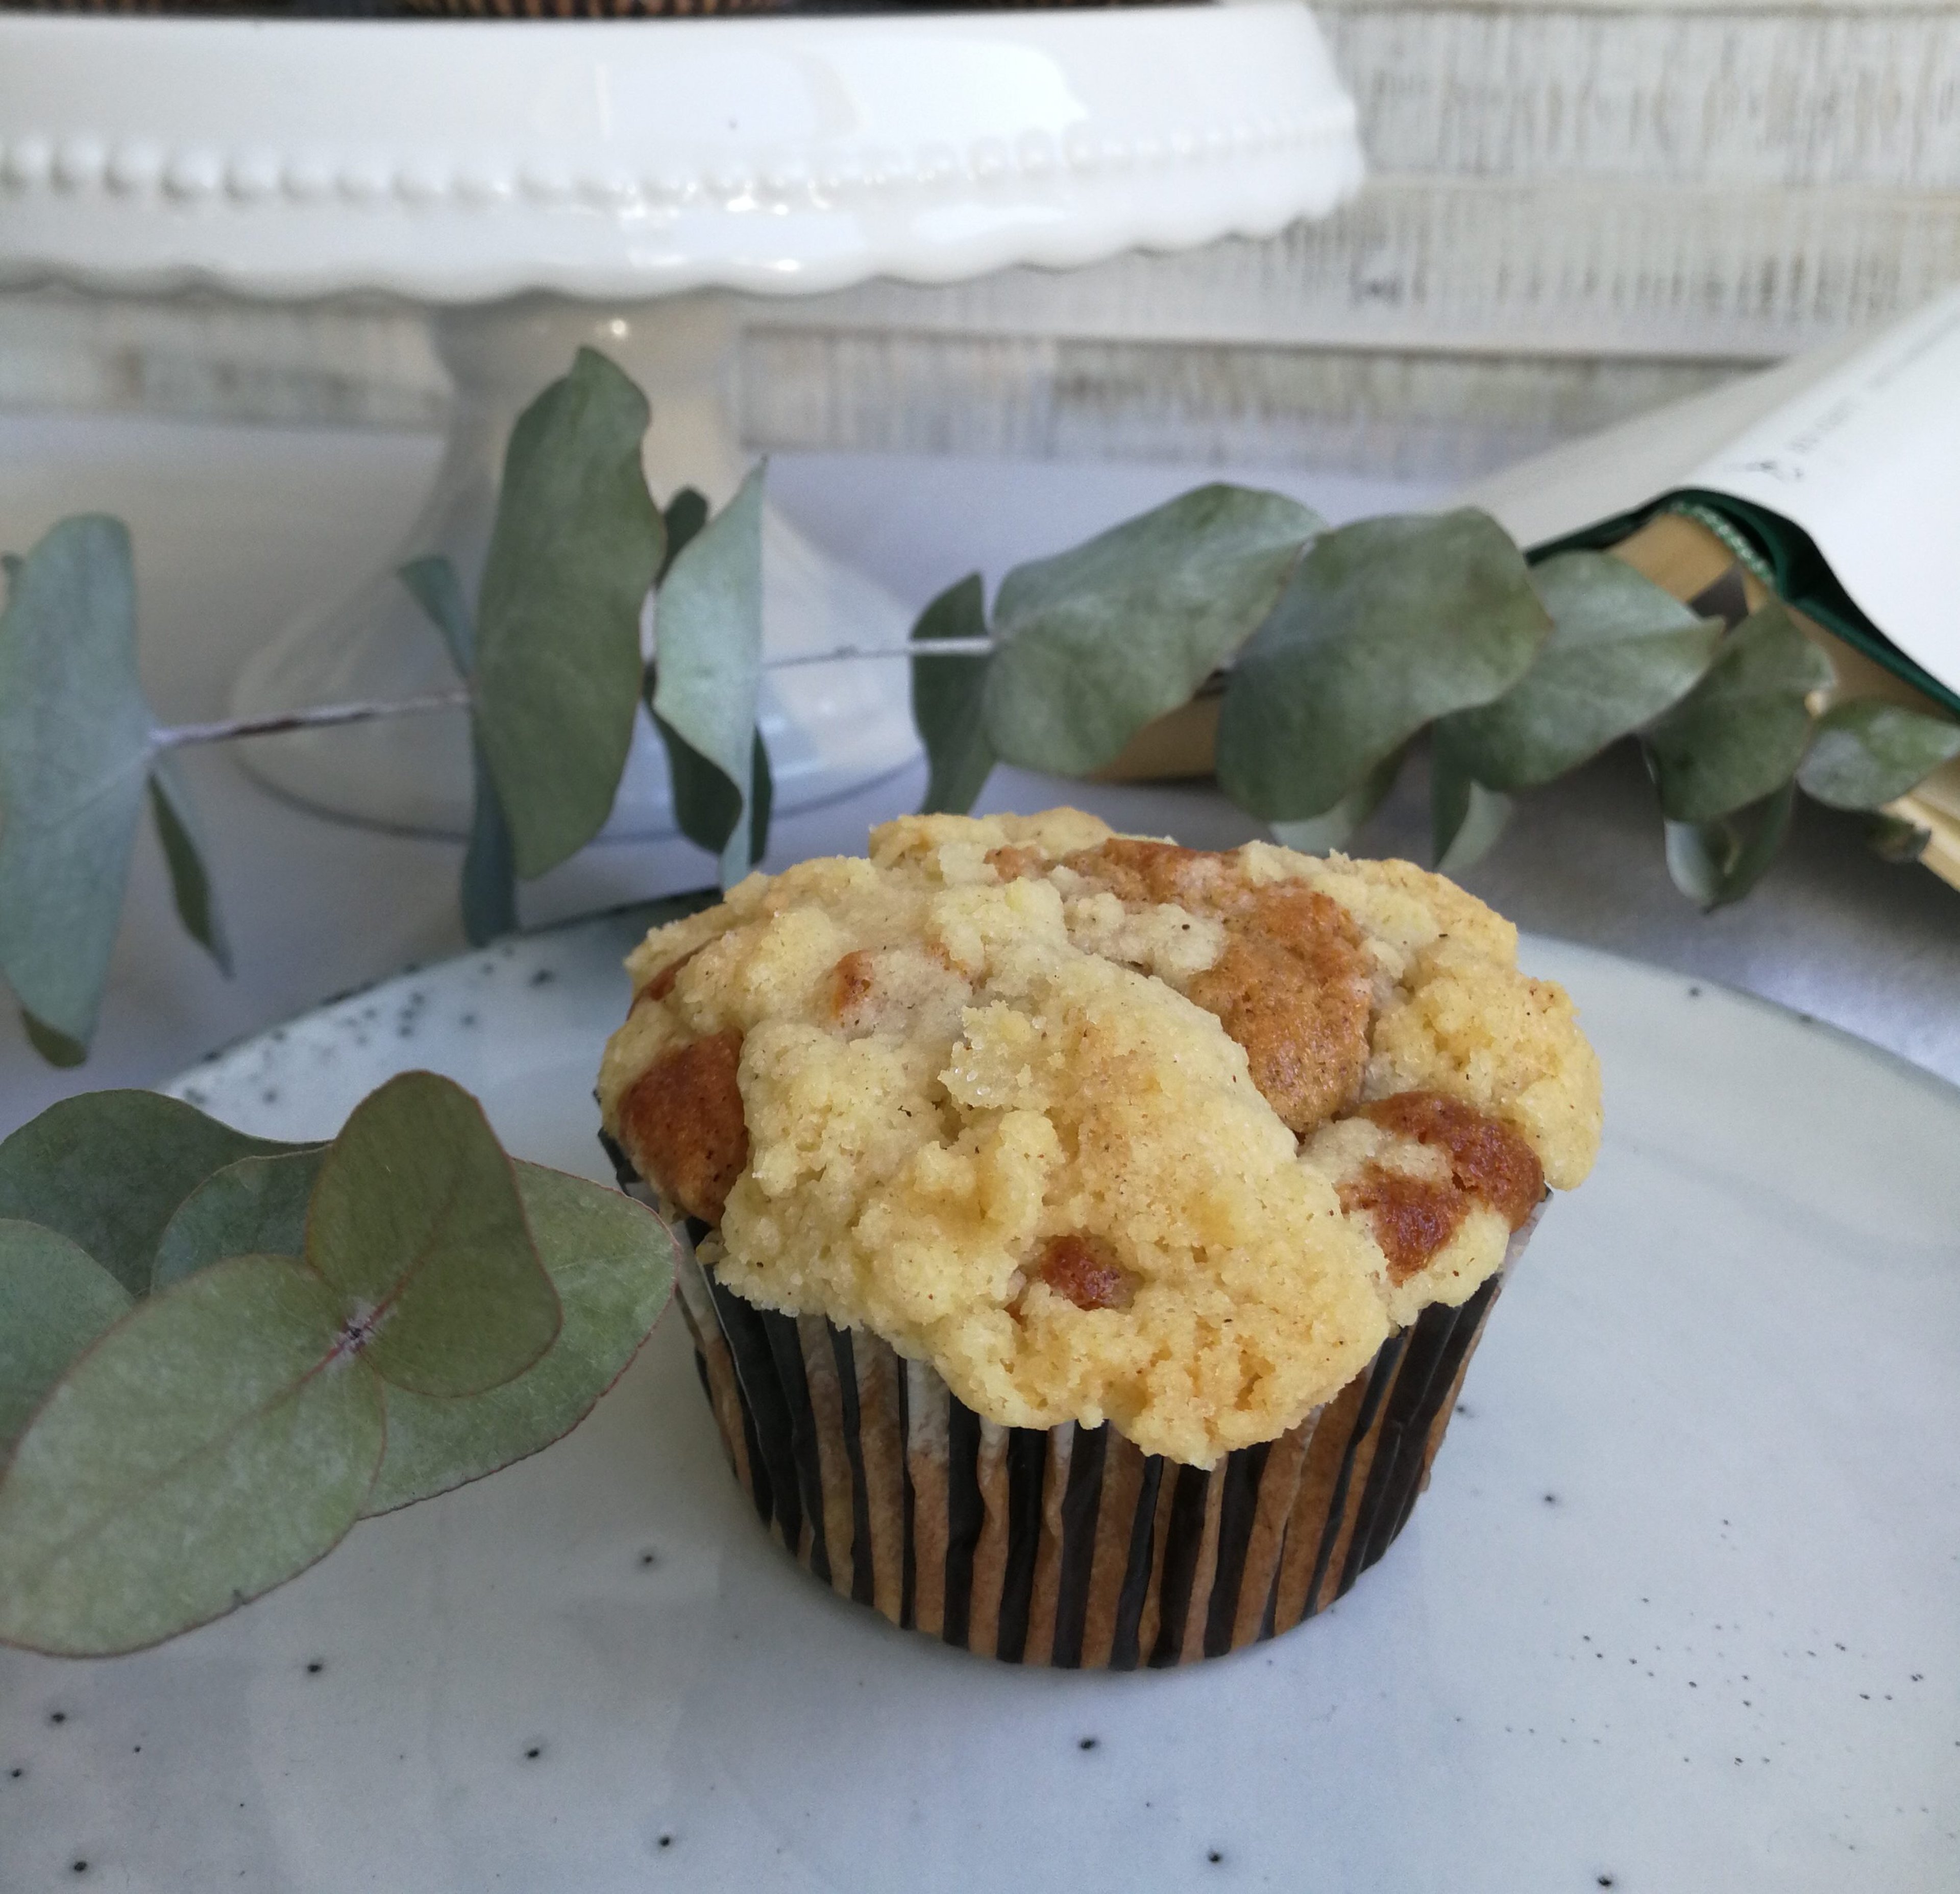 Cinnamon-apple muffins with streusel